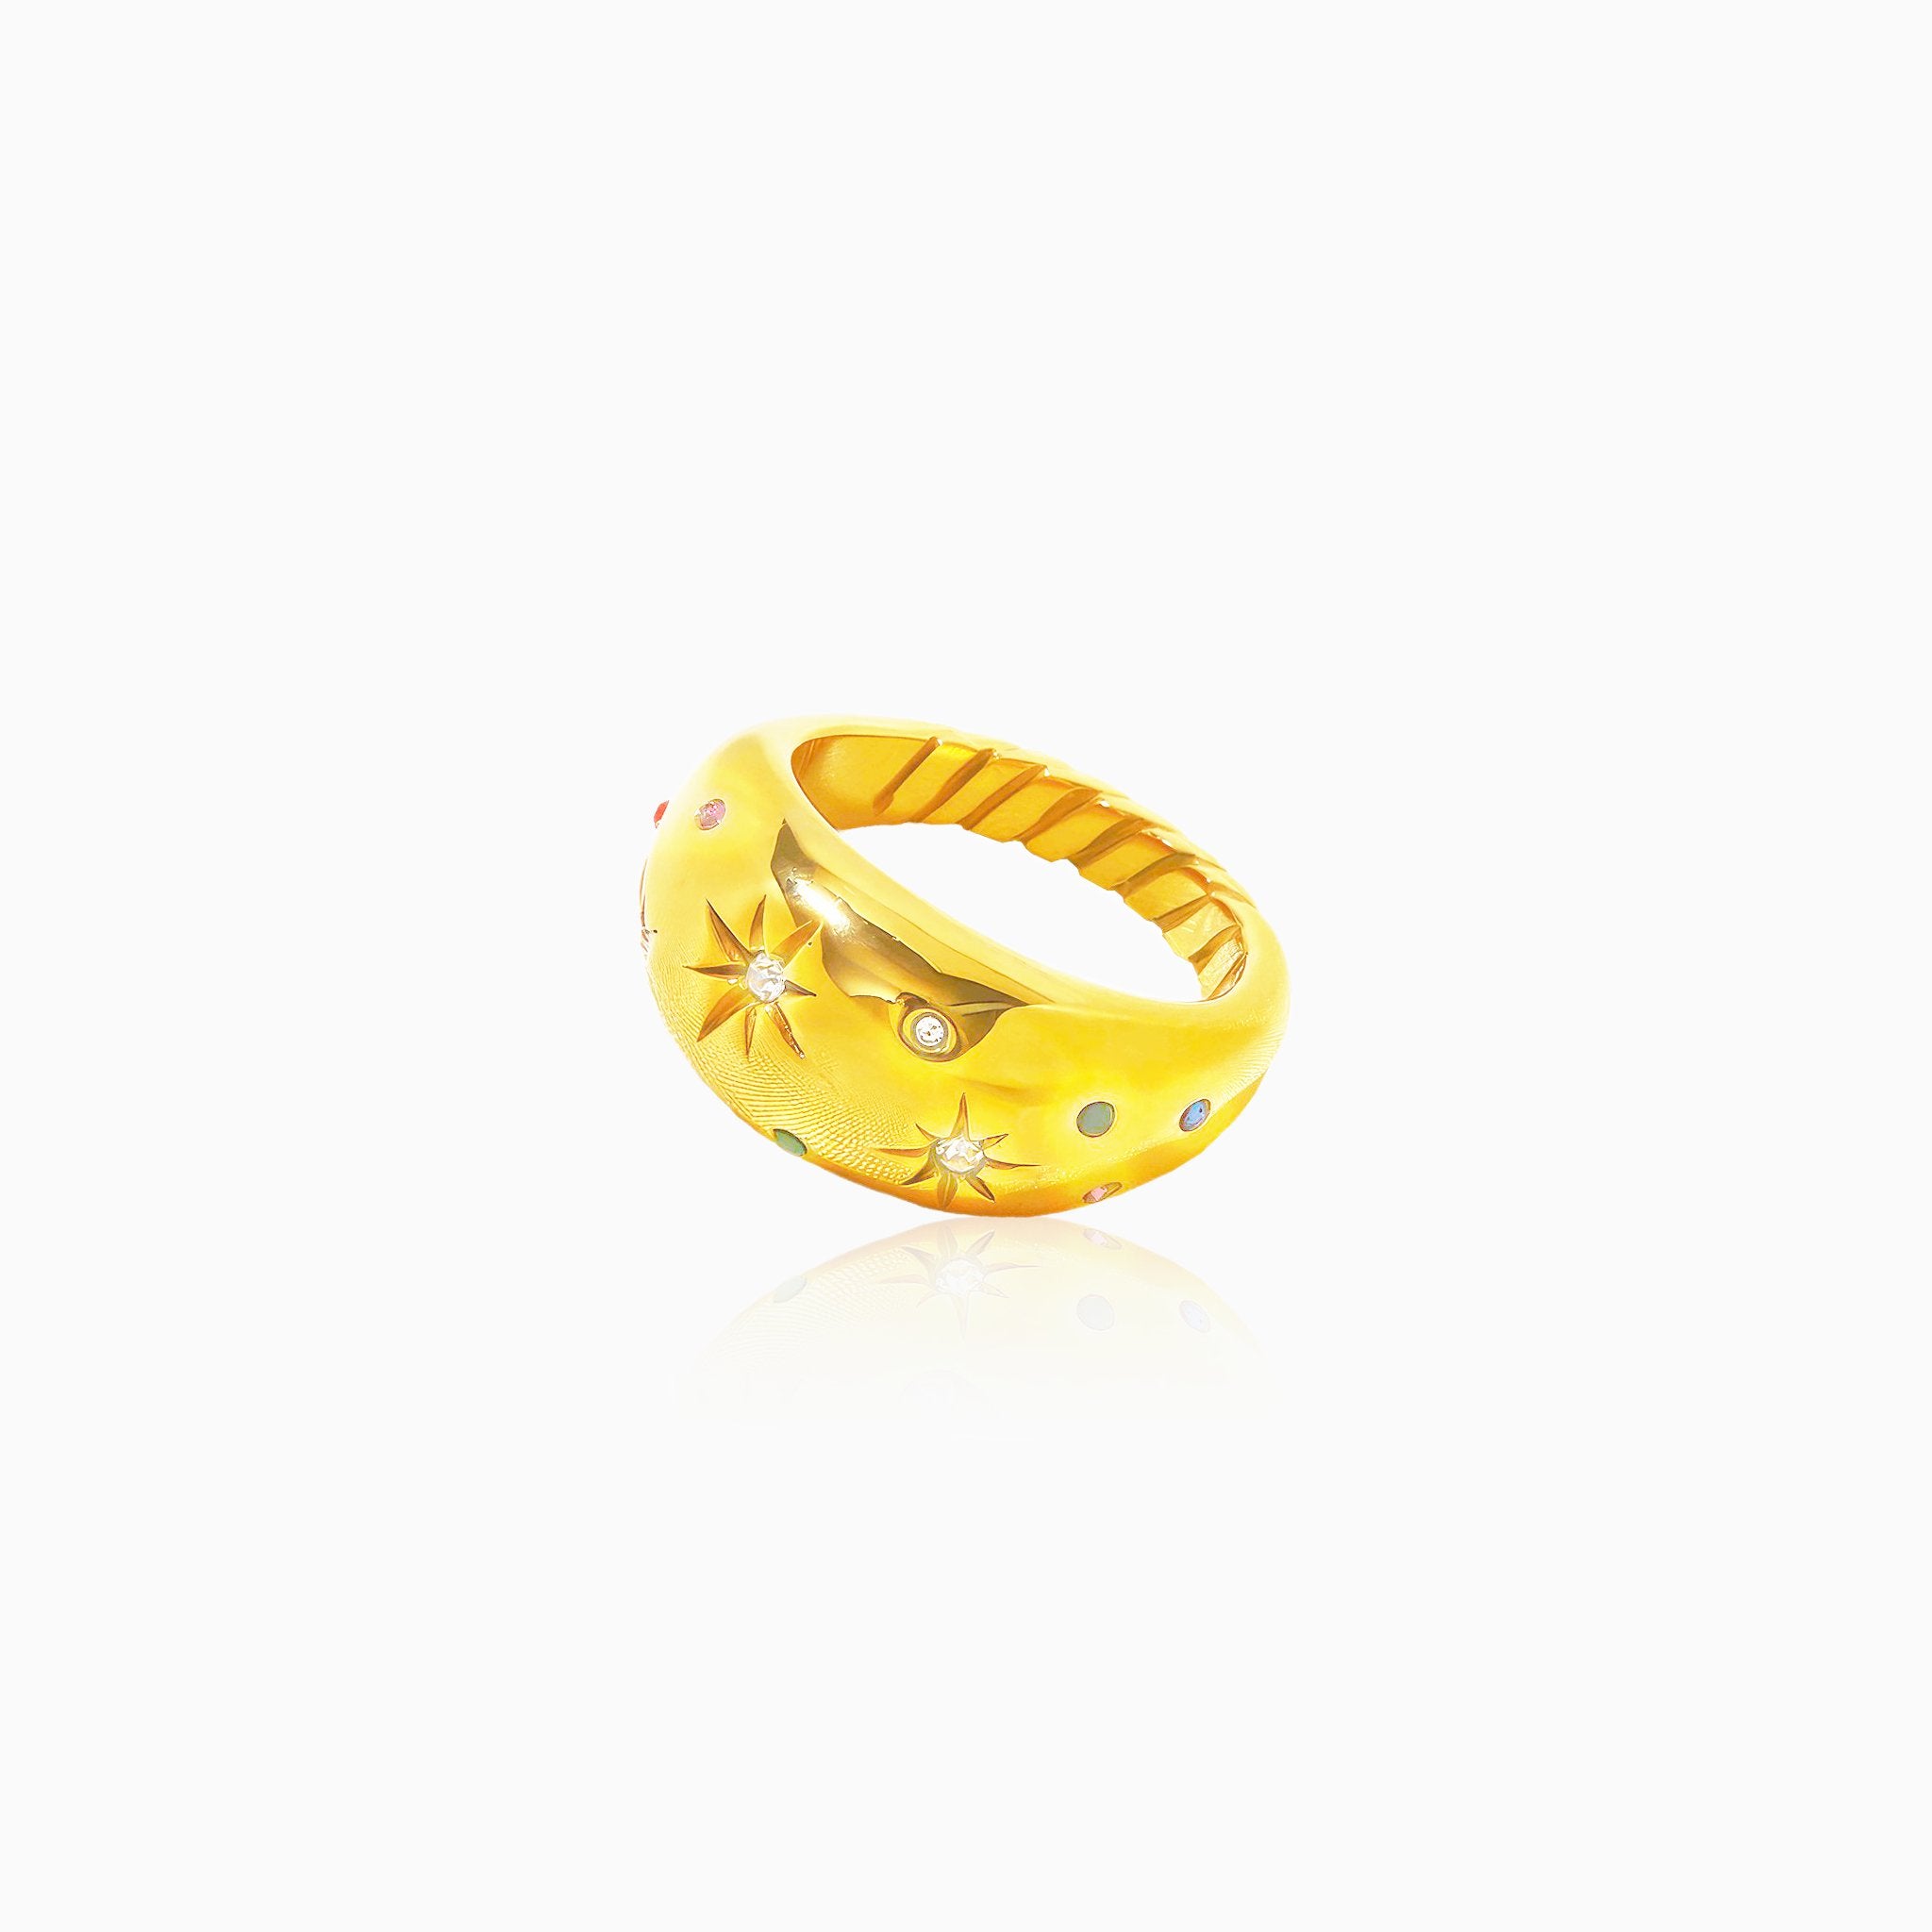 Vintage Hexagram Gemstone Ring - Nobbier - Ring - 18K Gold And Titanium PVD Coated Jewelry